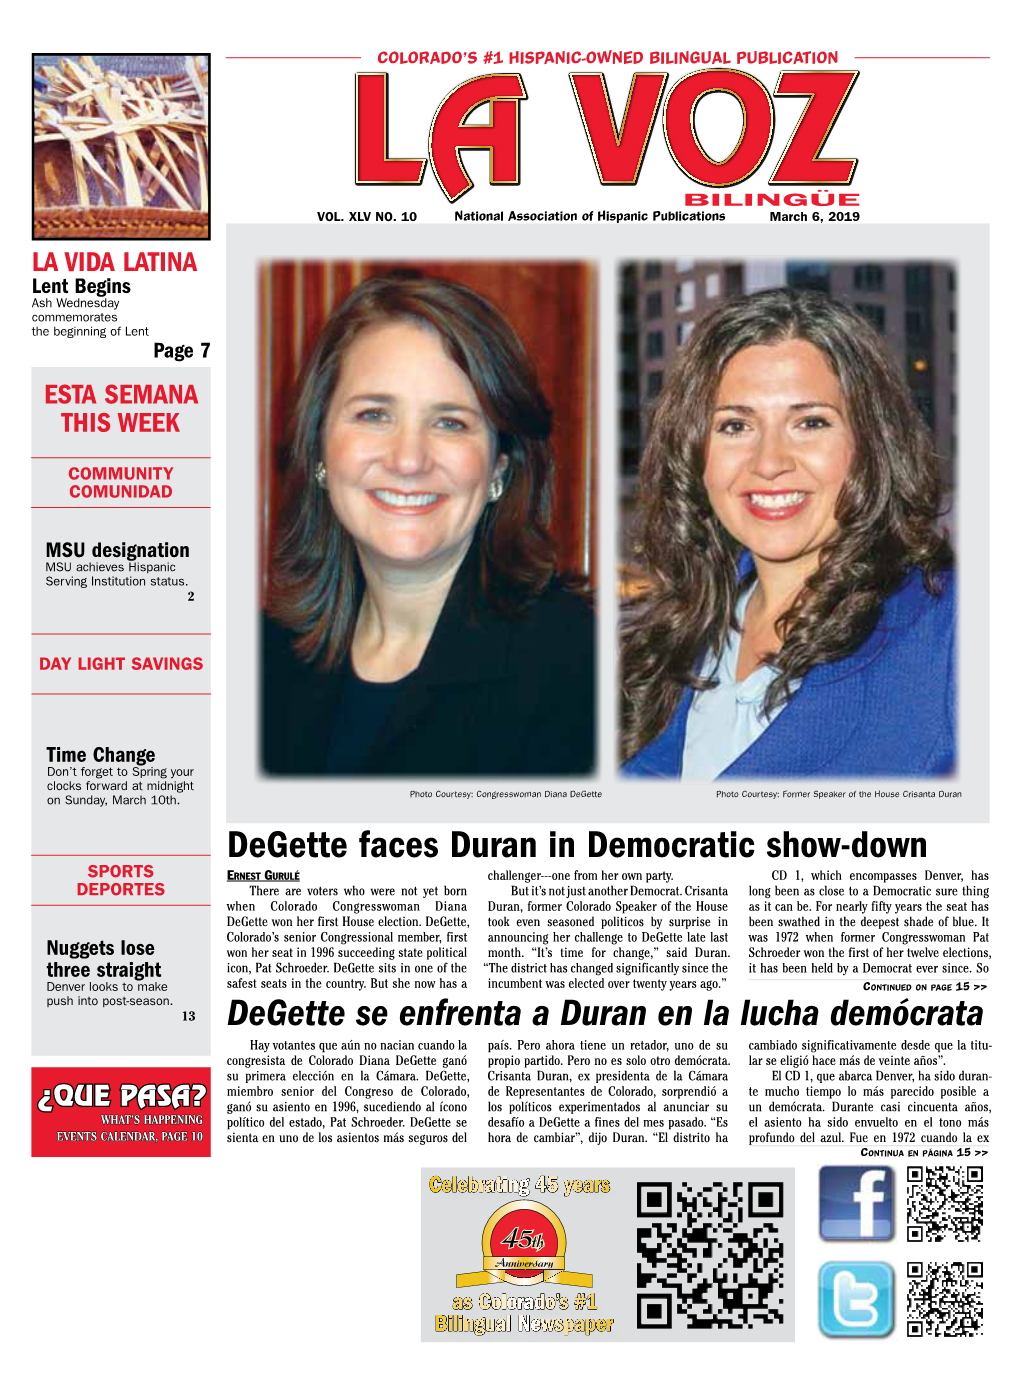 Degette Faces Duran in Democratic Show-Down Sports Ernest Gurulé Challenger---One from Her Own Party